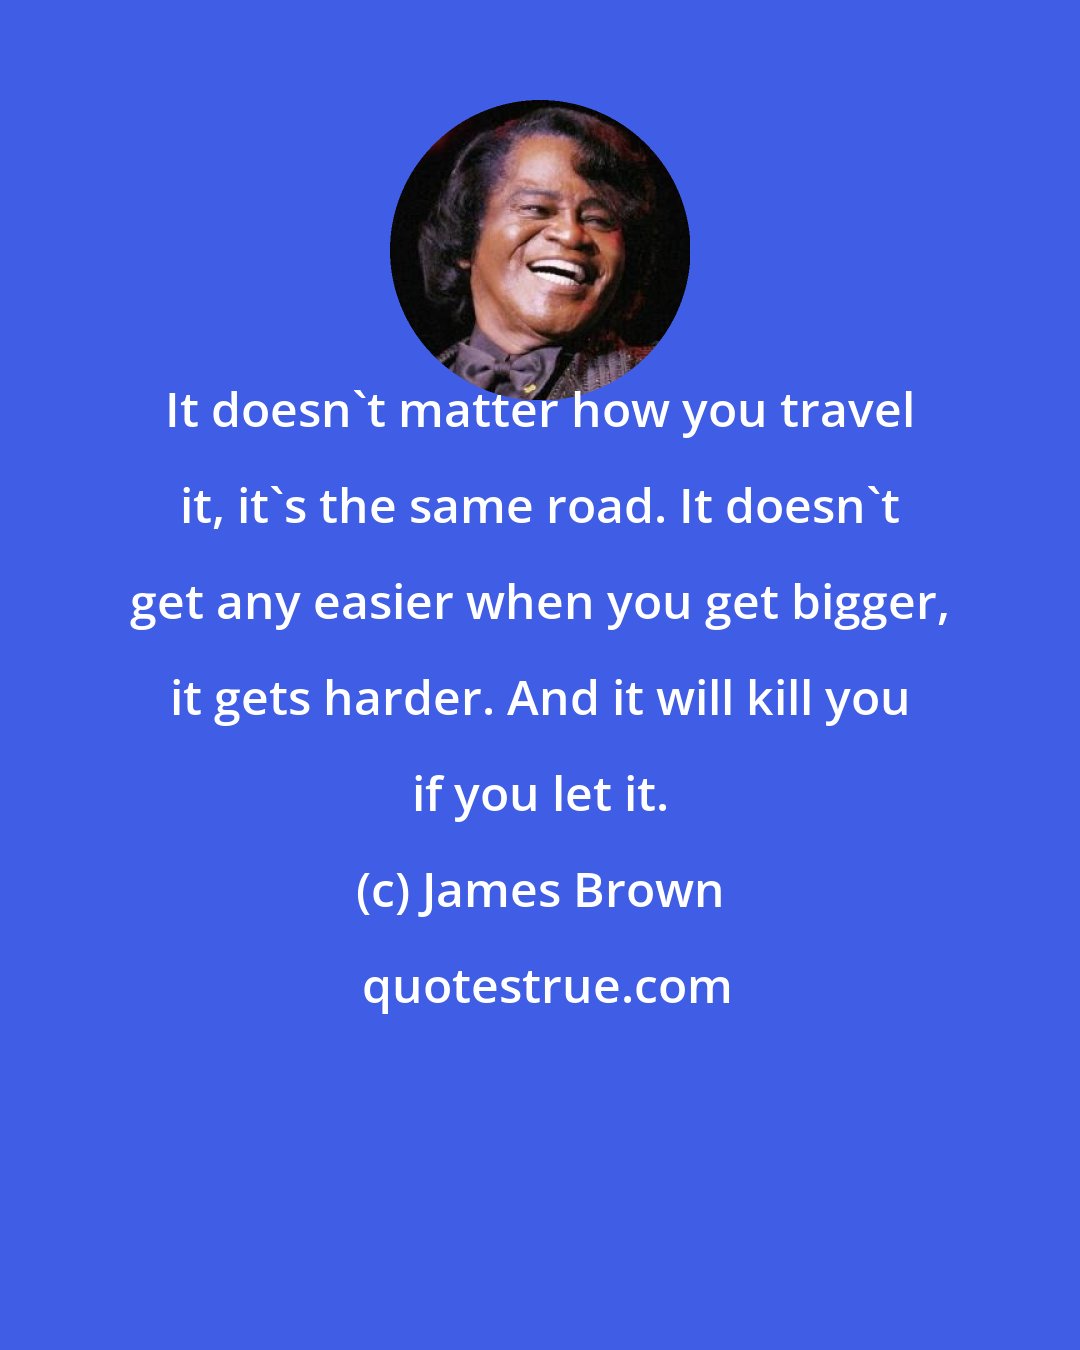 James Brown: It doesn't matter how you travel it, it's the same road. It doesn't get any easier when you get bigger, it gets harder. And it will kill you if you let it.